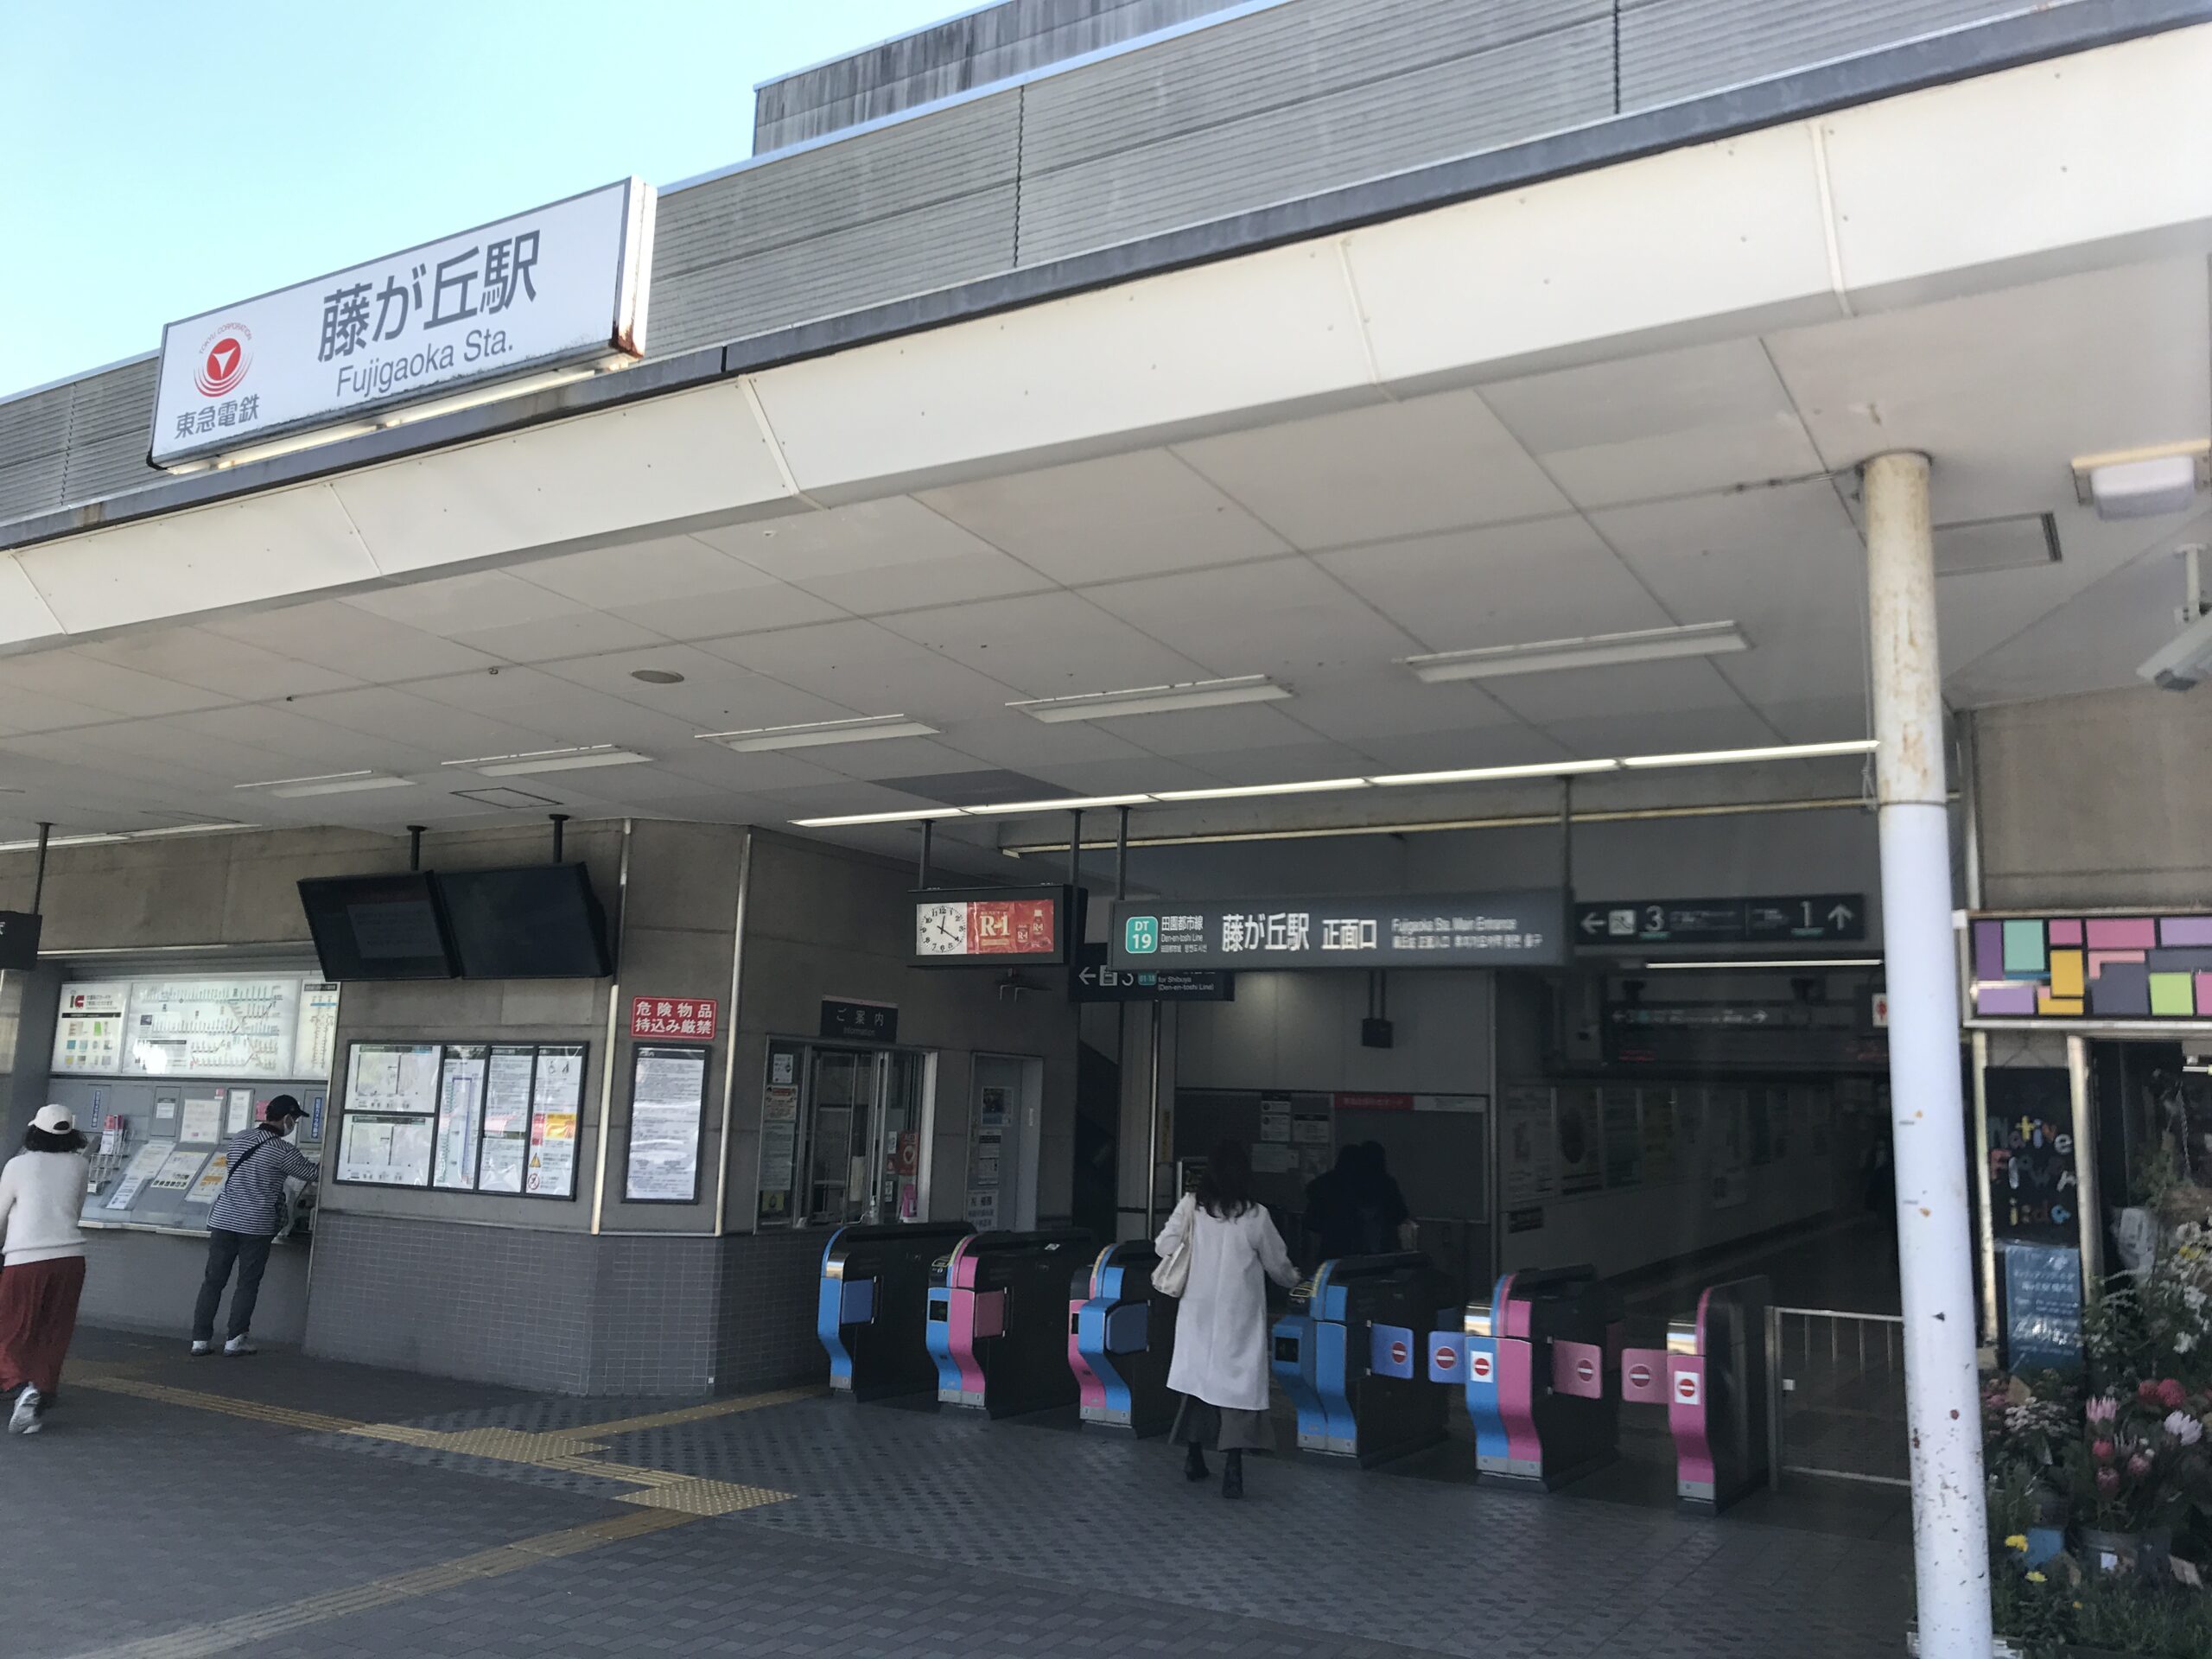 DT19_藤が丘駅正面口